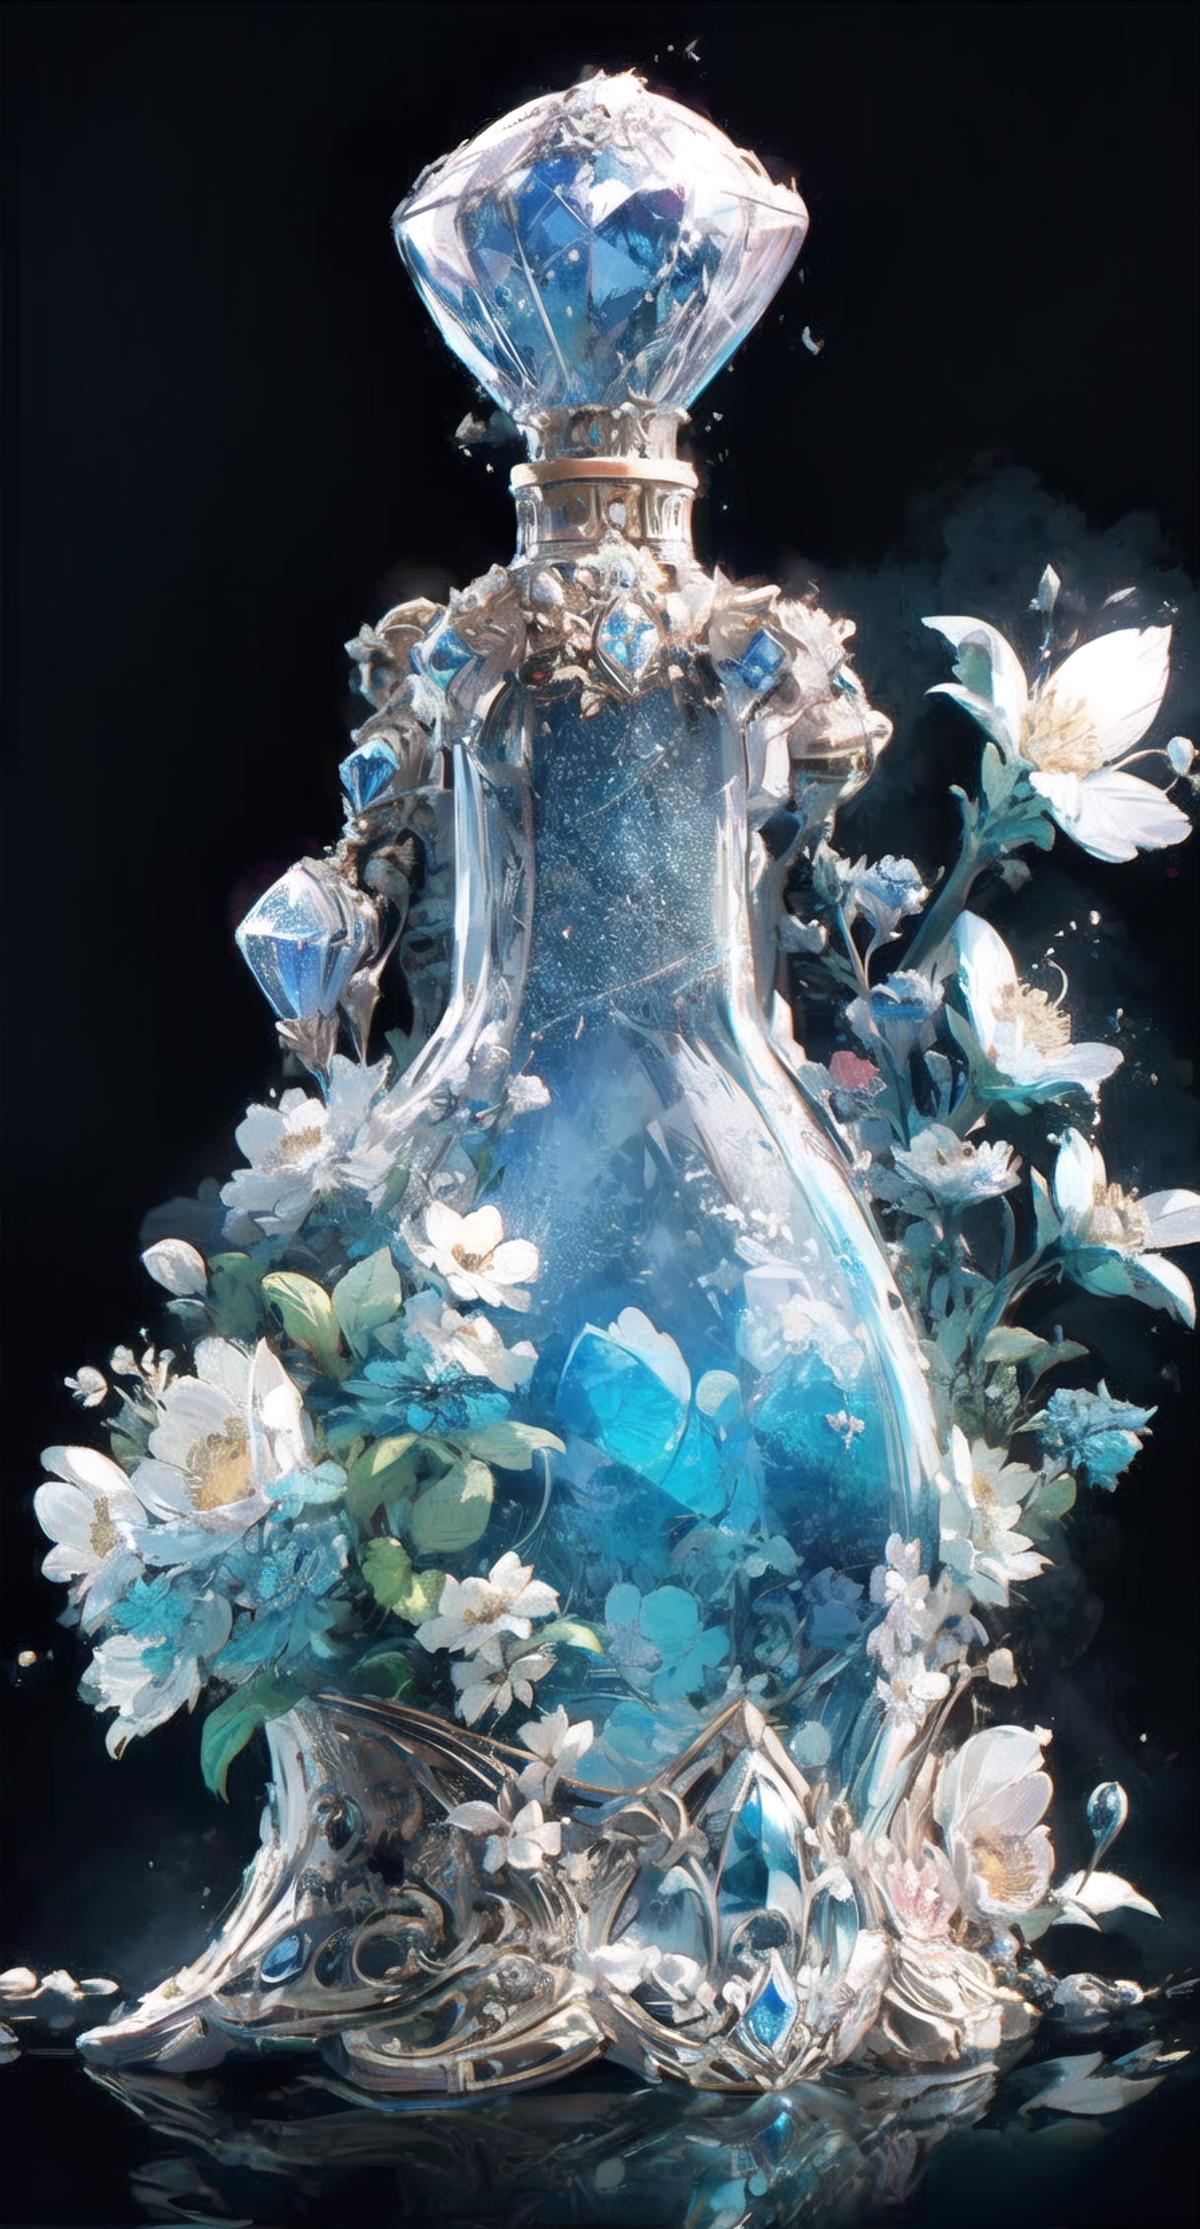 A beautifully painted bottle with white flowers and blue elements.